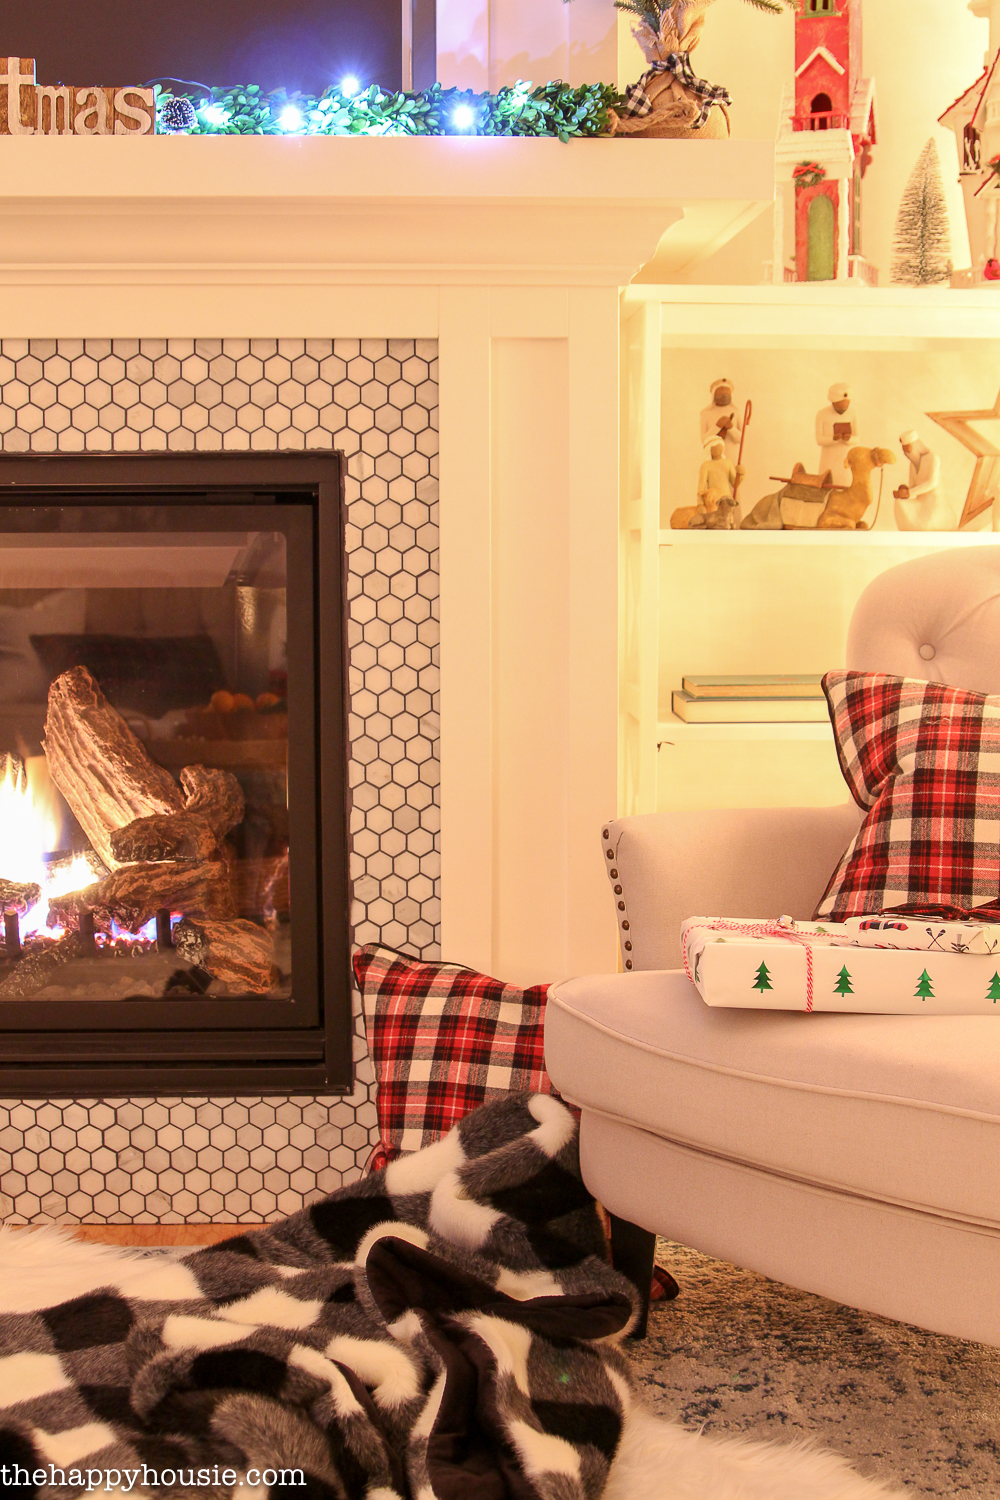 There are cozy blankets and pillows by the lit fireplace.